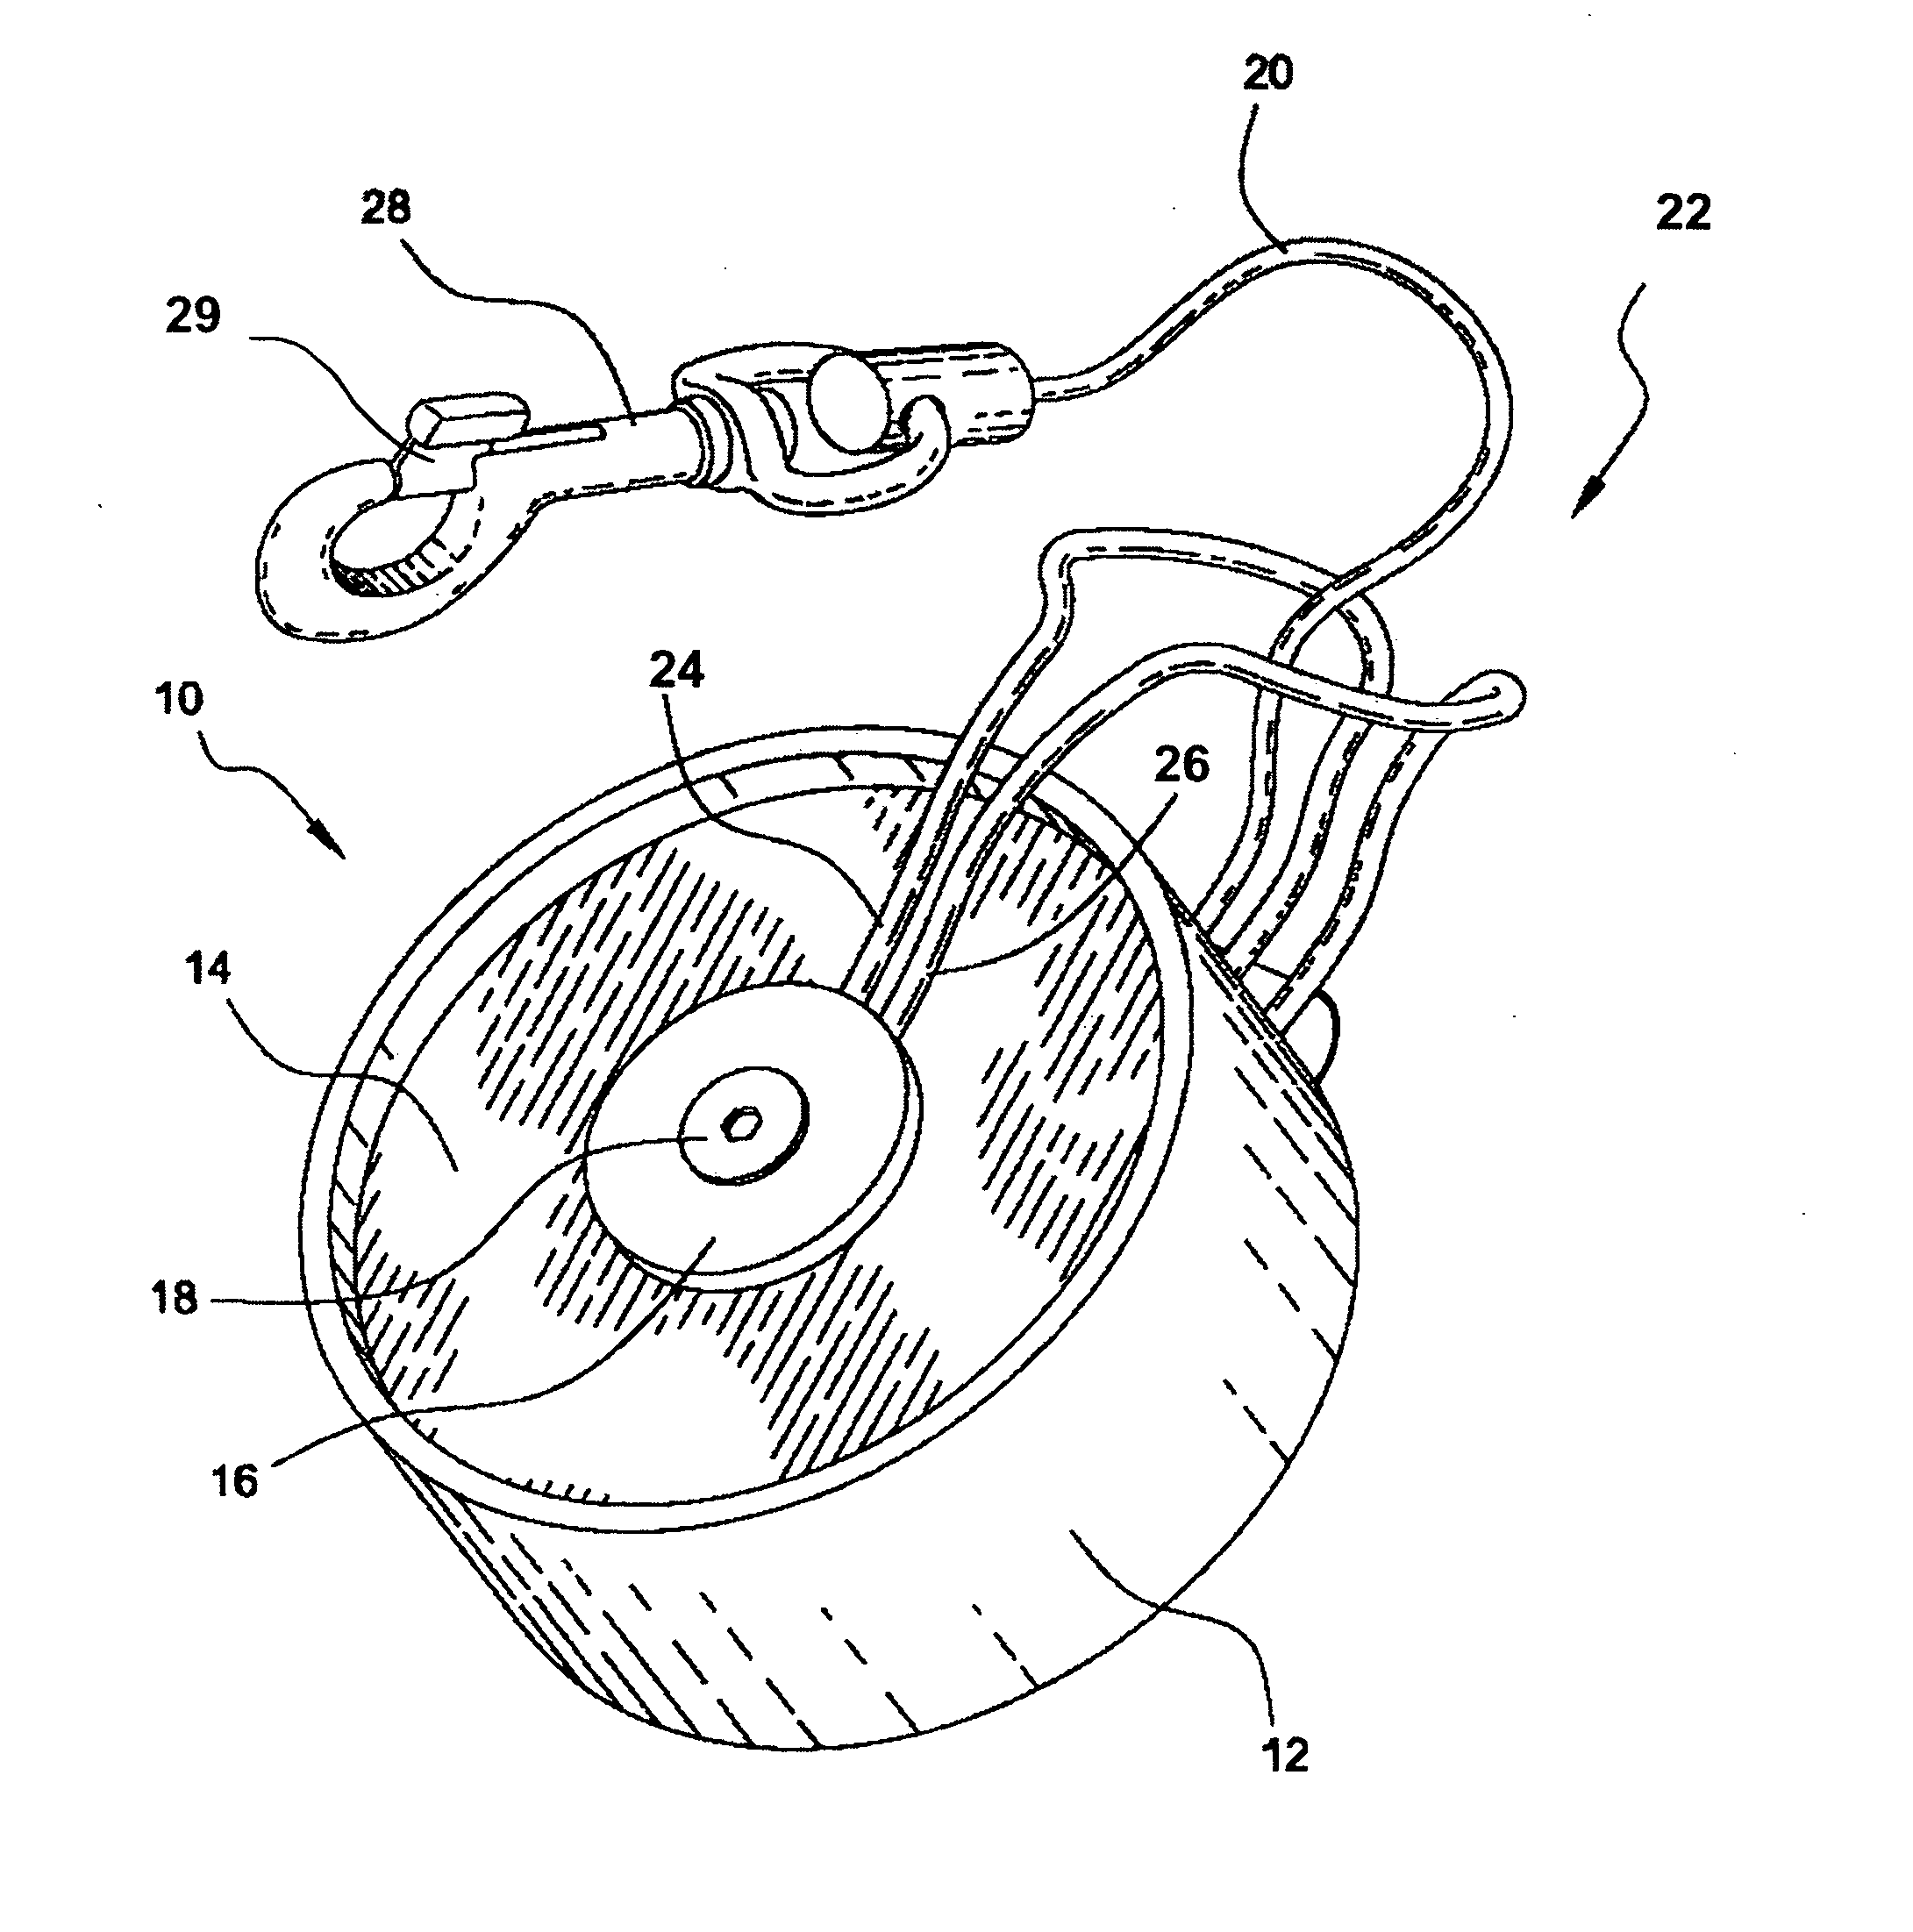 Retractable tether device for hand tools